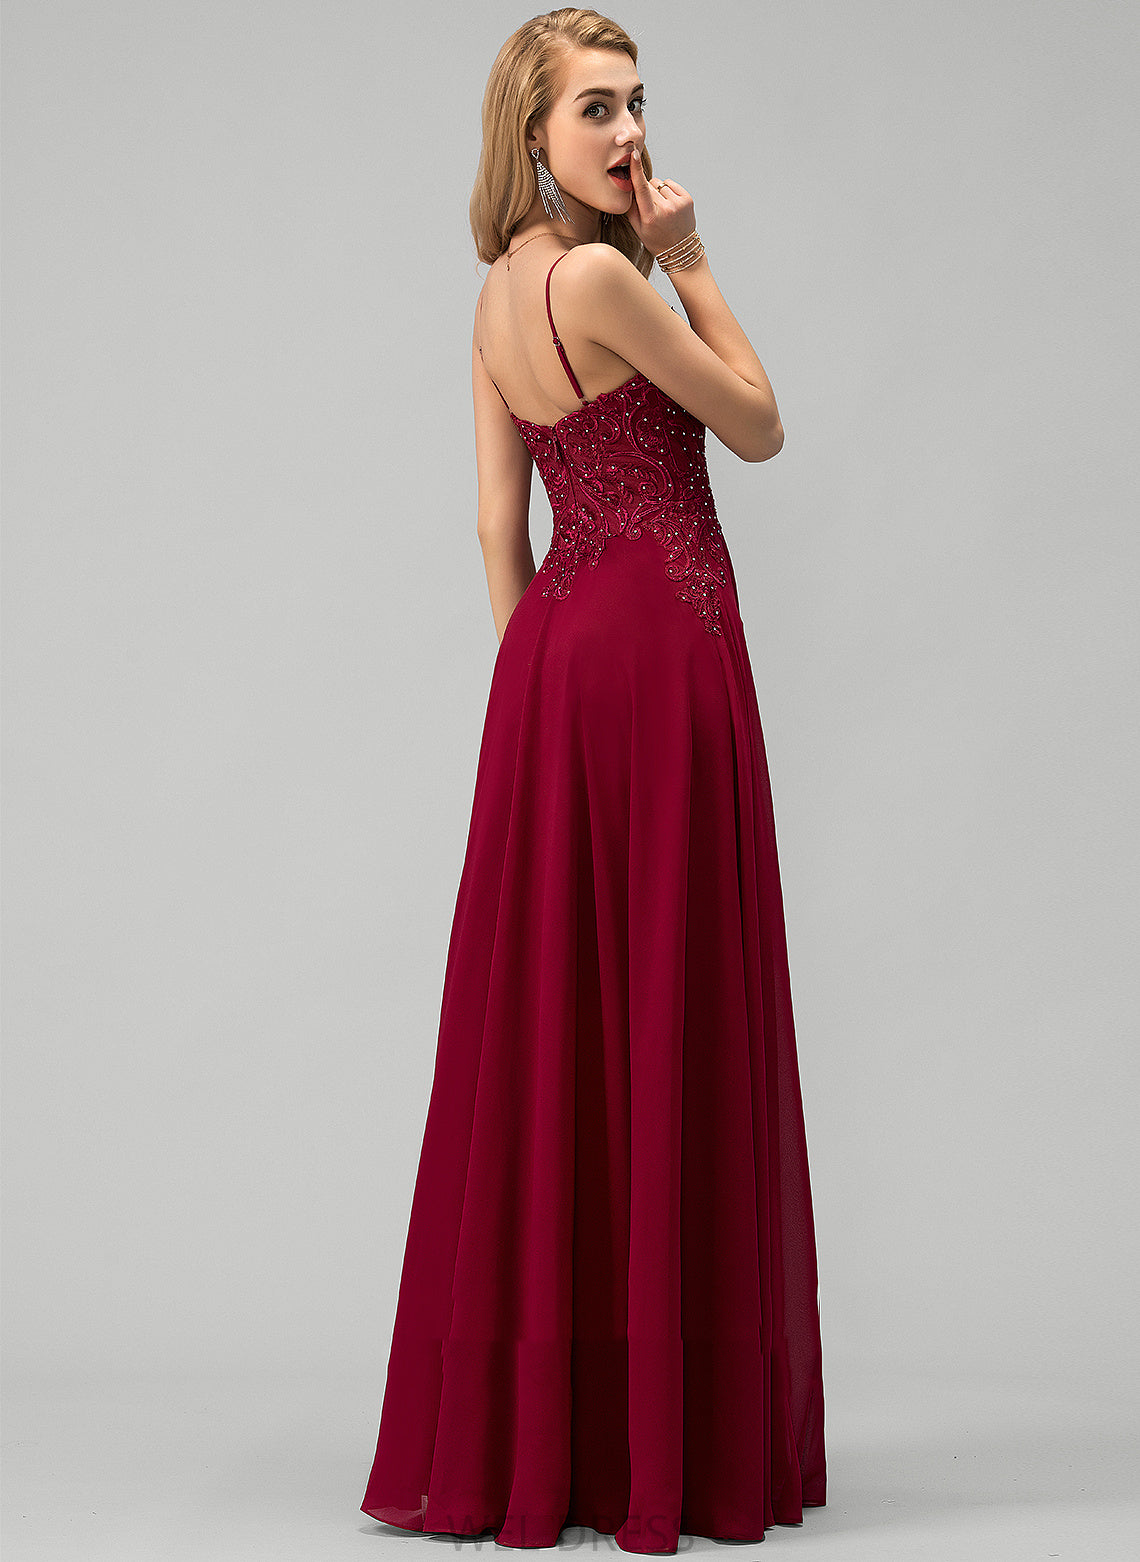 Prom Dresses With Floor-Length Sweetheart Lace Mariana Beading Sequins A-Line Chiffon